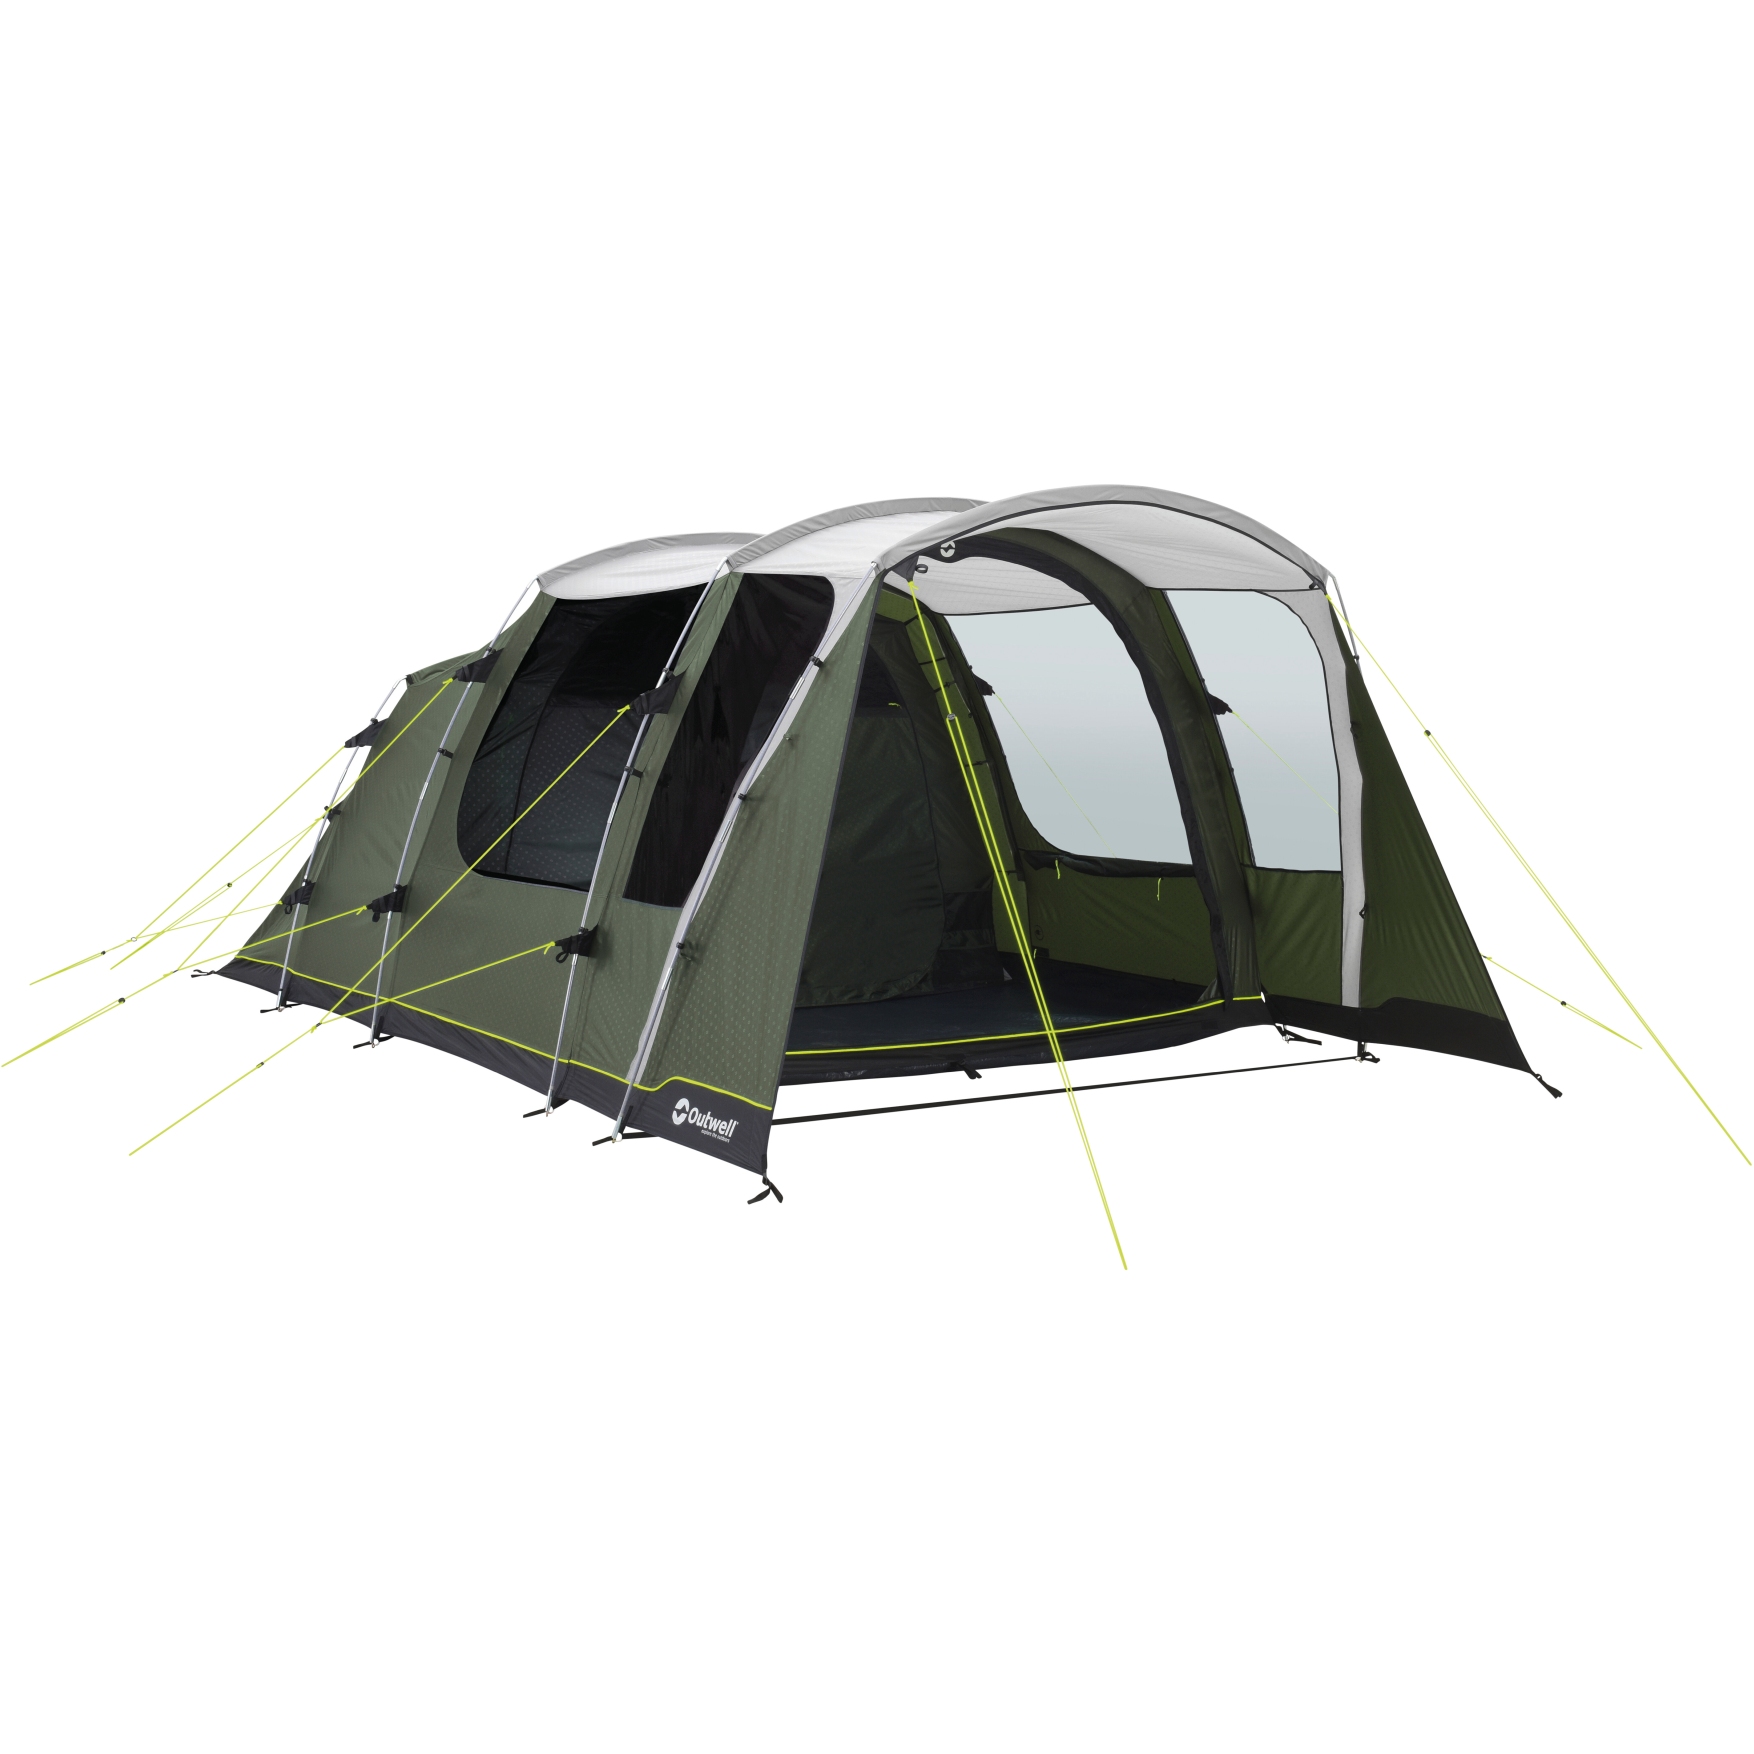 Picture of Outwell Ashwood 5 Tent - Dark Leaf